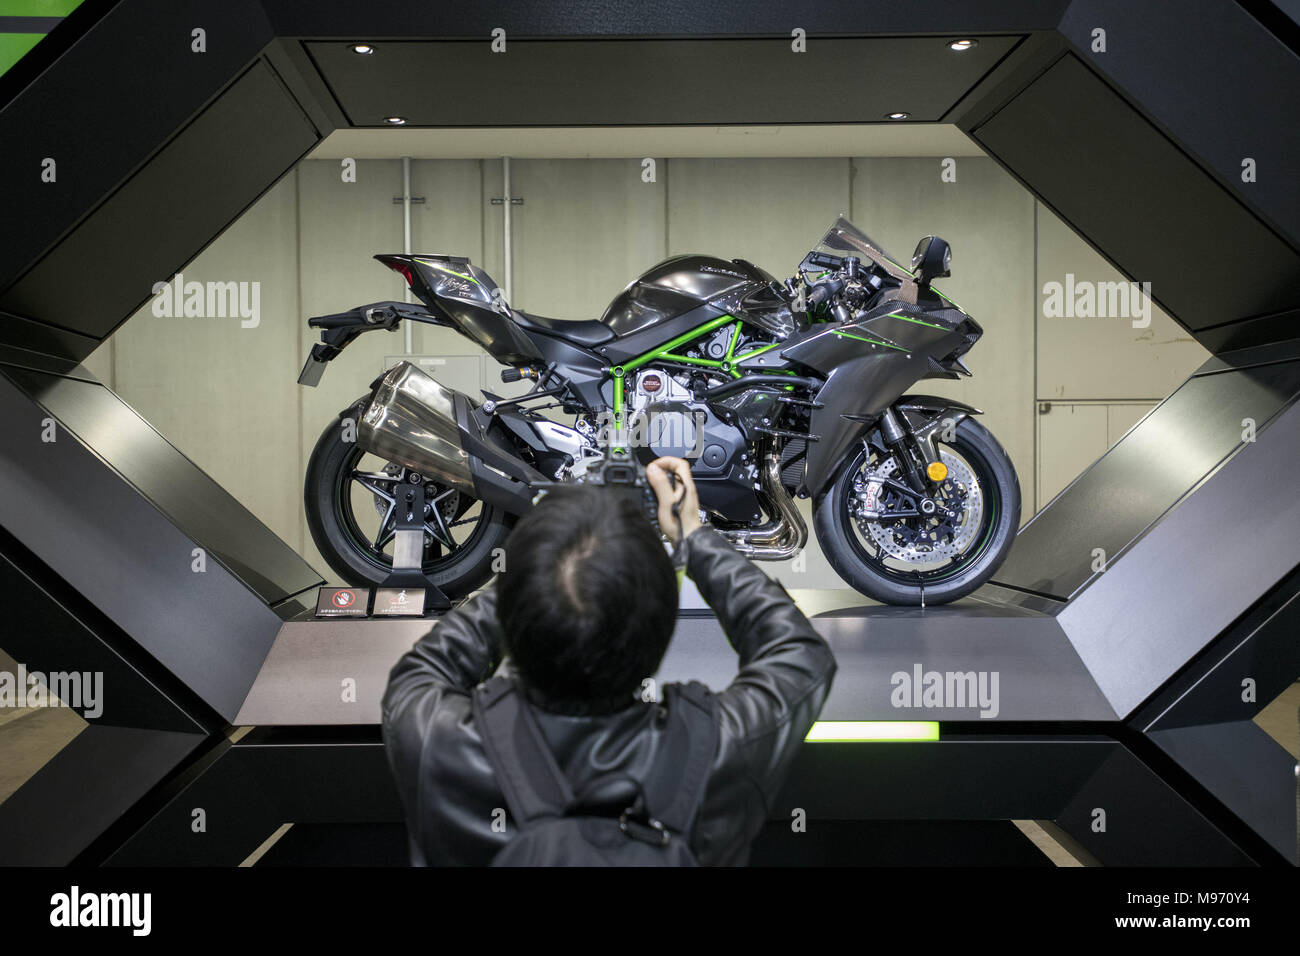 Ninja H2 Resolution Stock Photography and Images -